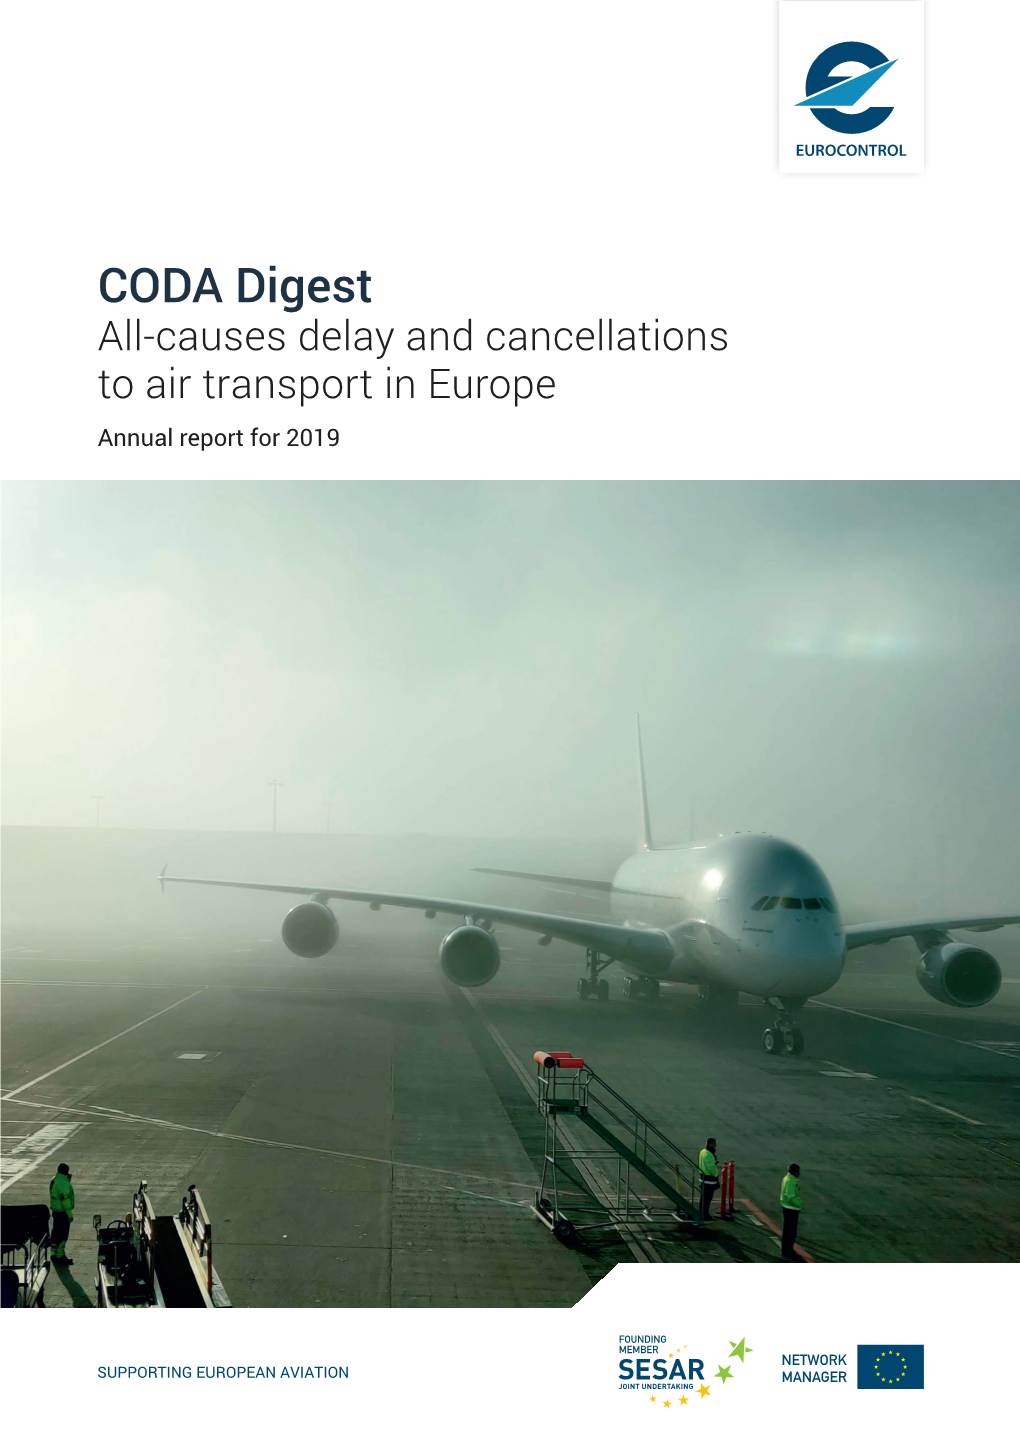 CODA Digest All-Causes Delay and Cancellations to Air Transport in Europe Annual Report for 2019